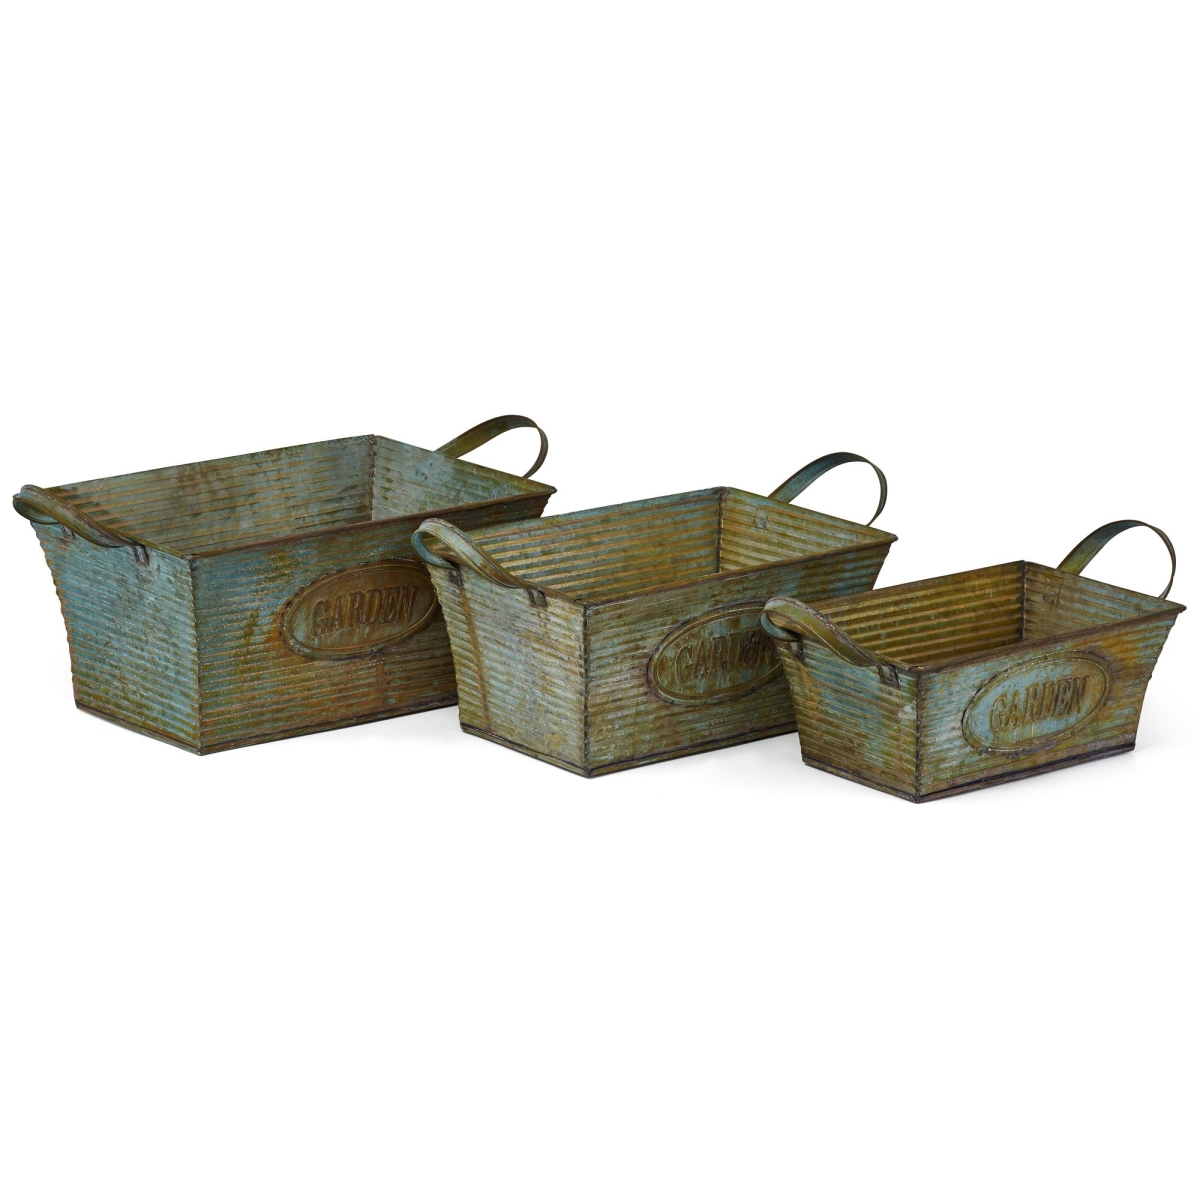 Imax Z27800-3 Marian Galvanized Planters With Green Finish - Set Of 3